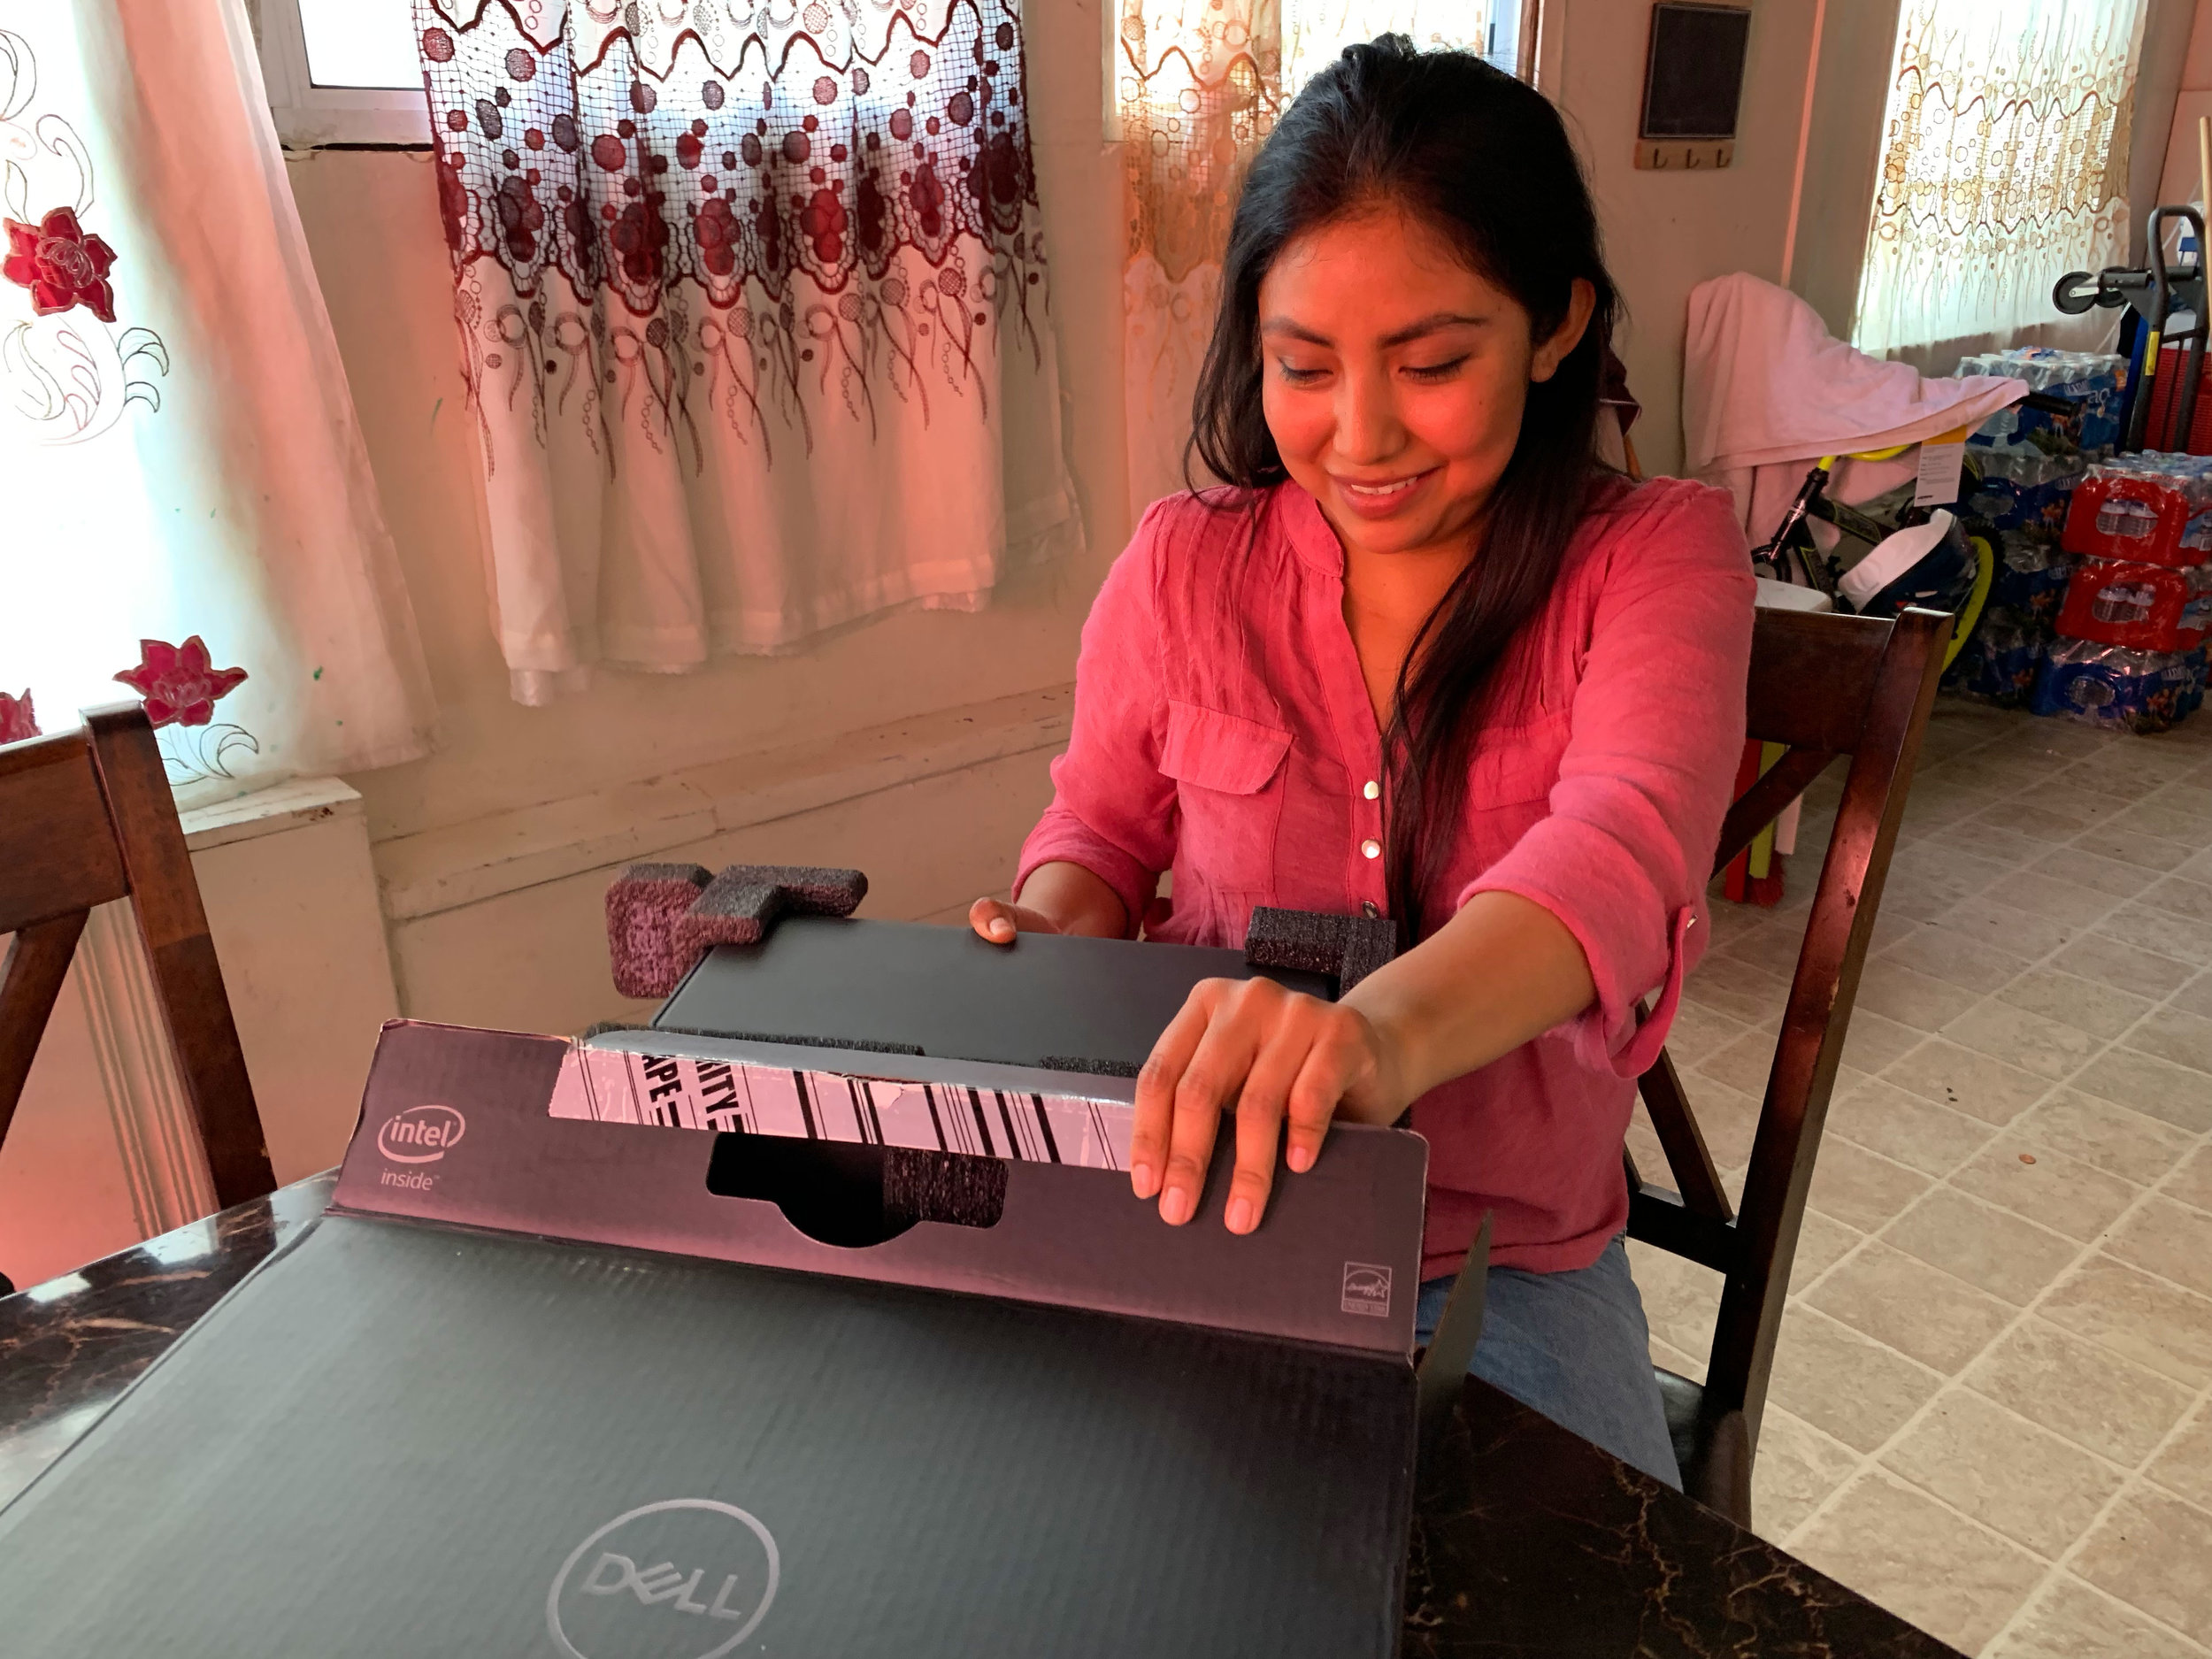  This is the first computer Ana has ever owned in her life. She’s speechless. All thanks to our amazing donors. ;) 